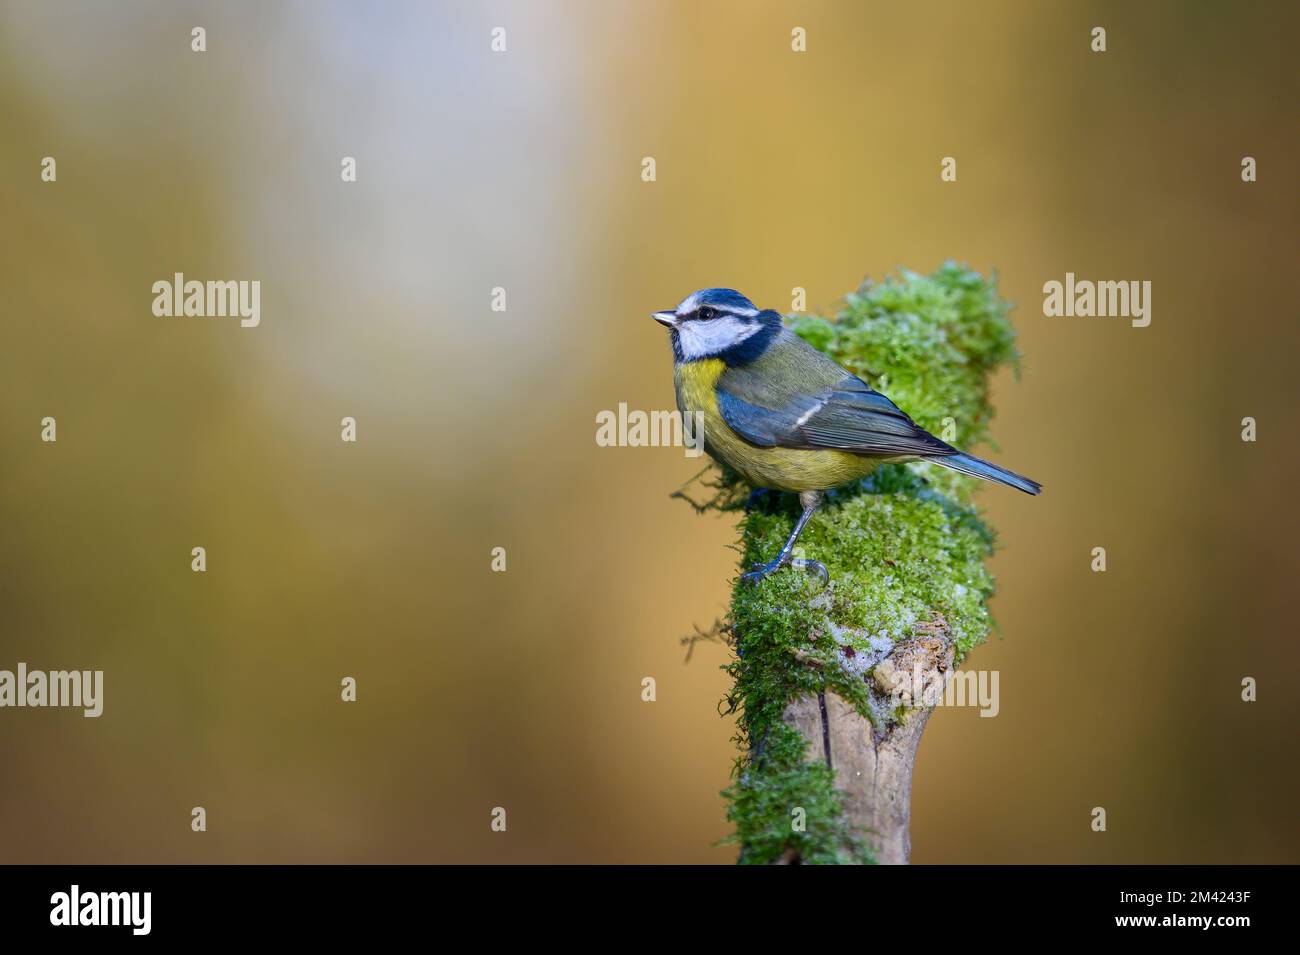 Blue Tit, Cyanistes caeruleus, perched on a moss covered branch, looking left and up Stock Photo